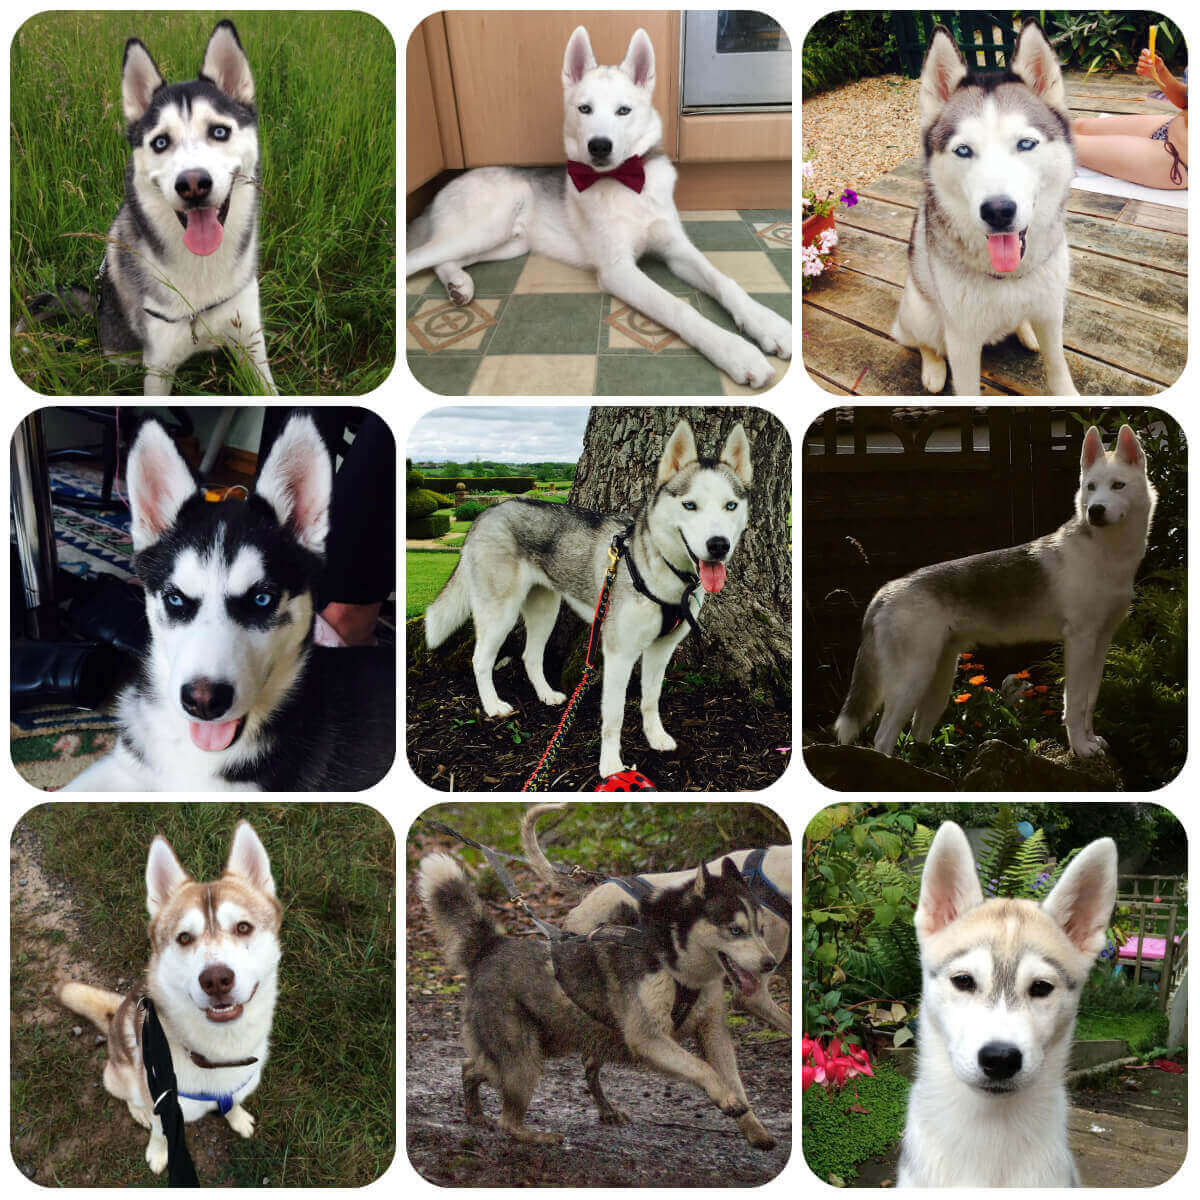 A collage of husky dogs and puppies, part of BorrowMyDoggy